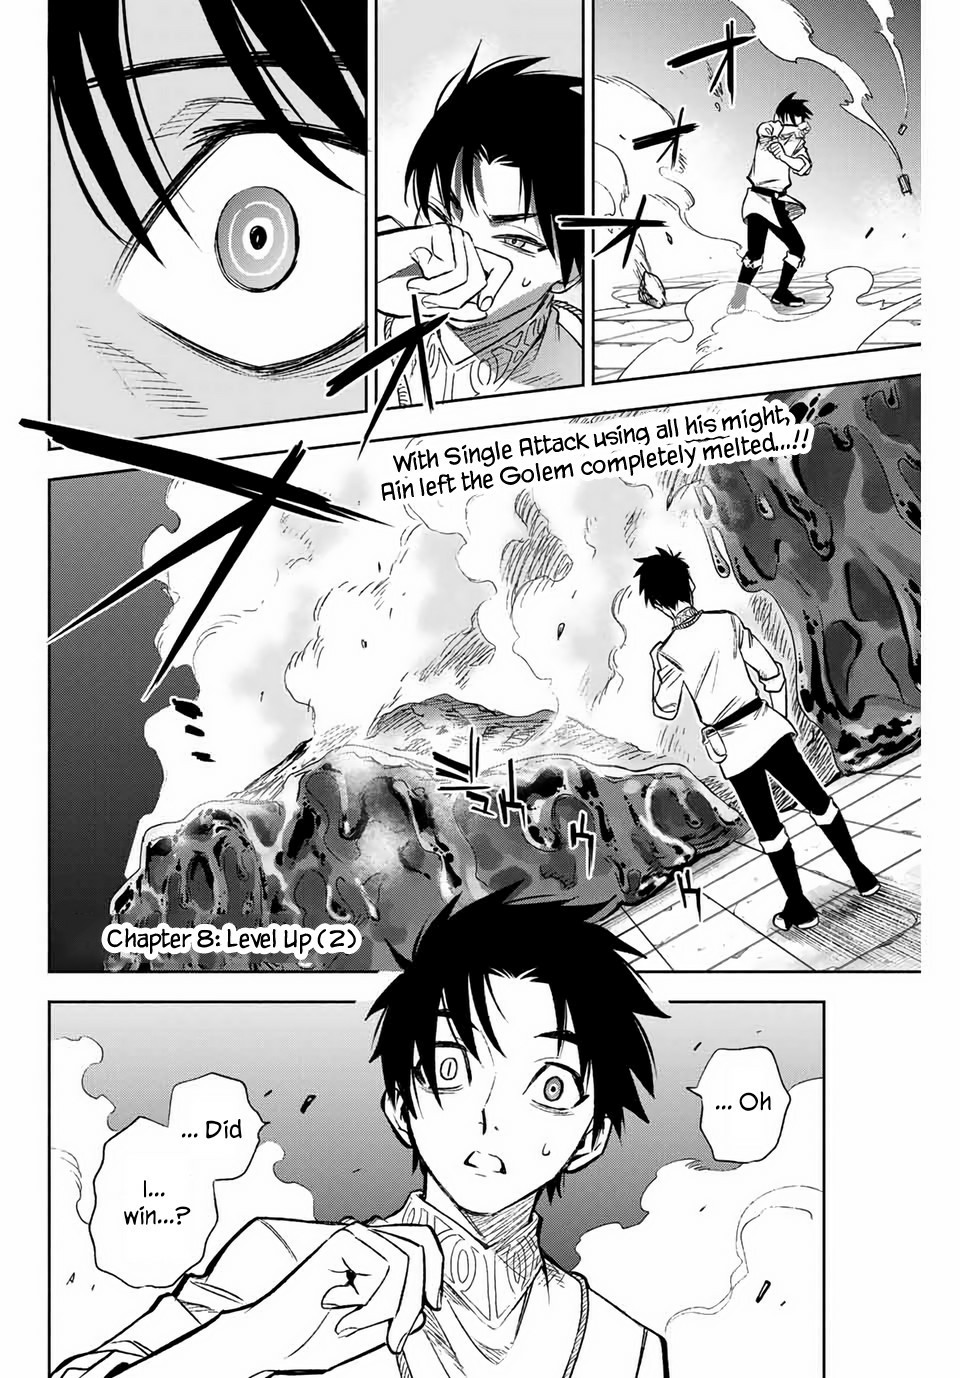 The Unfavorable Job [Appraiser] Is Actually The Strongest Chapter 8.2: Level Up (2) - Picture 2